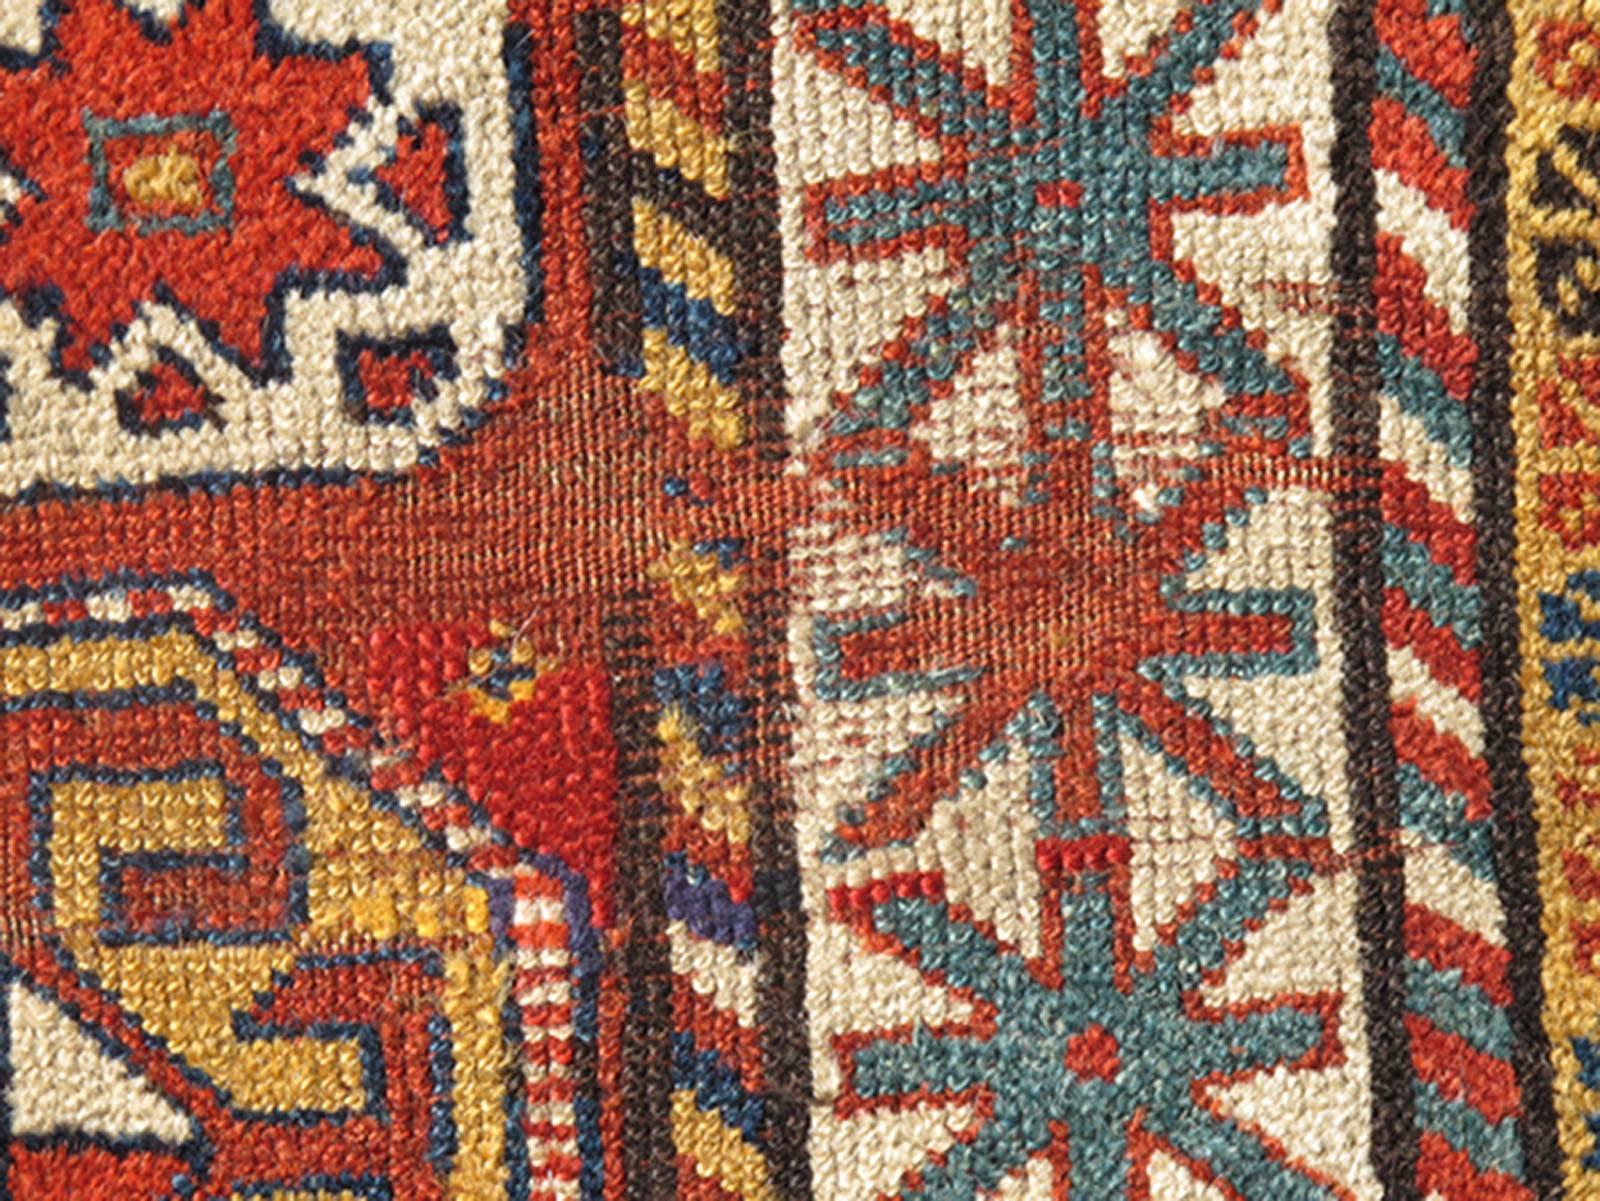 Unique Antique Qashqai Rug with Geometric Motifs in Red, Blue, and Golden Yellow In Good Condition For Sale In Atlanta, GA